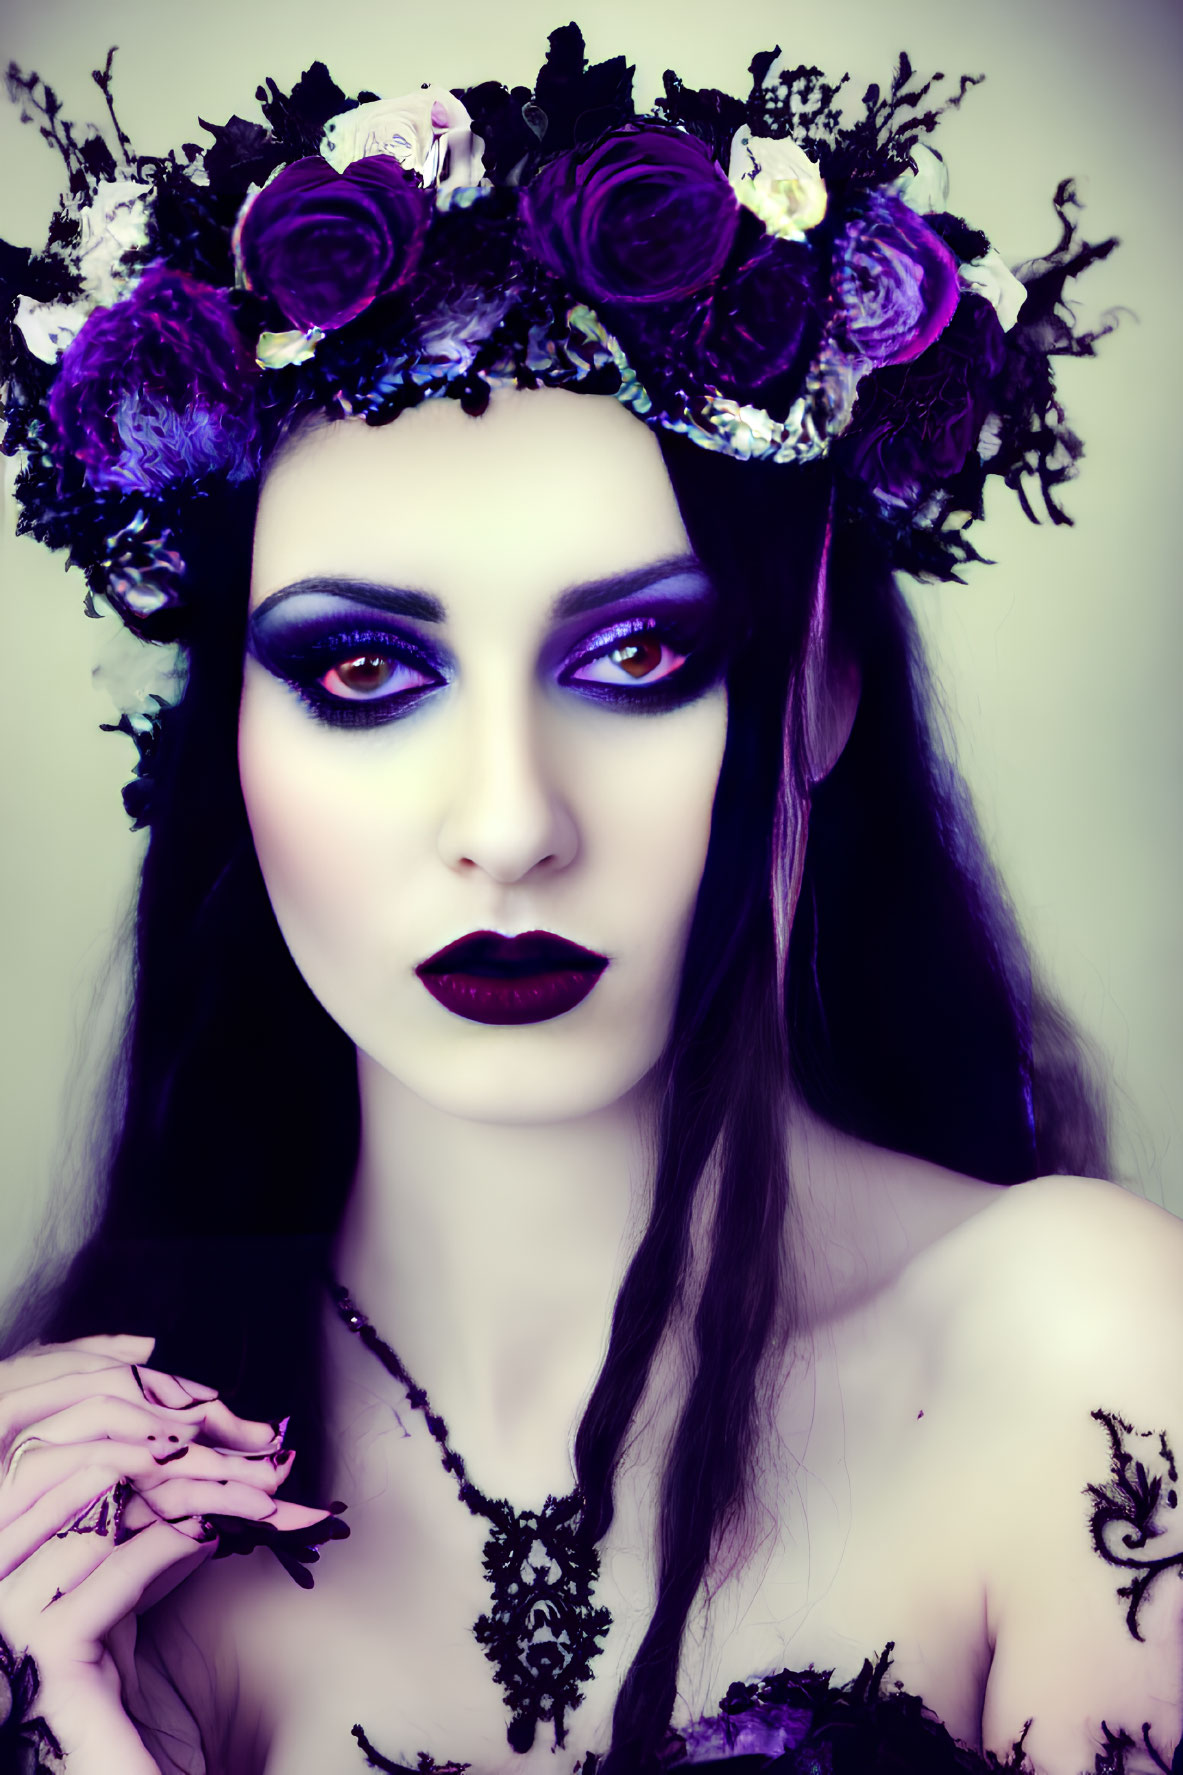 Dark Makeup Aesthetic with Purple Lipstick, Eye Shadow, and Floral Crown